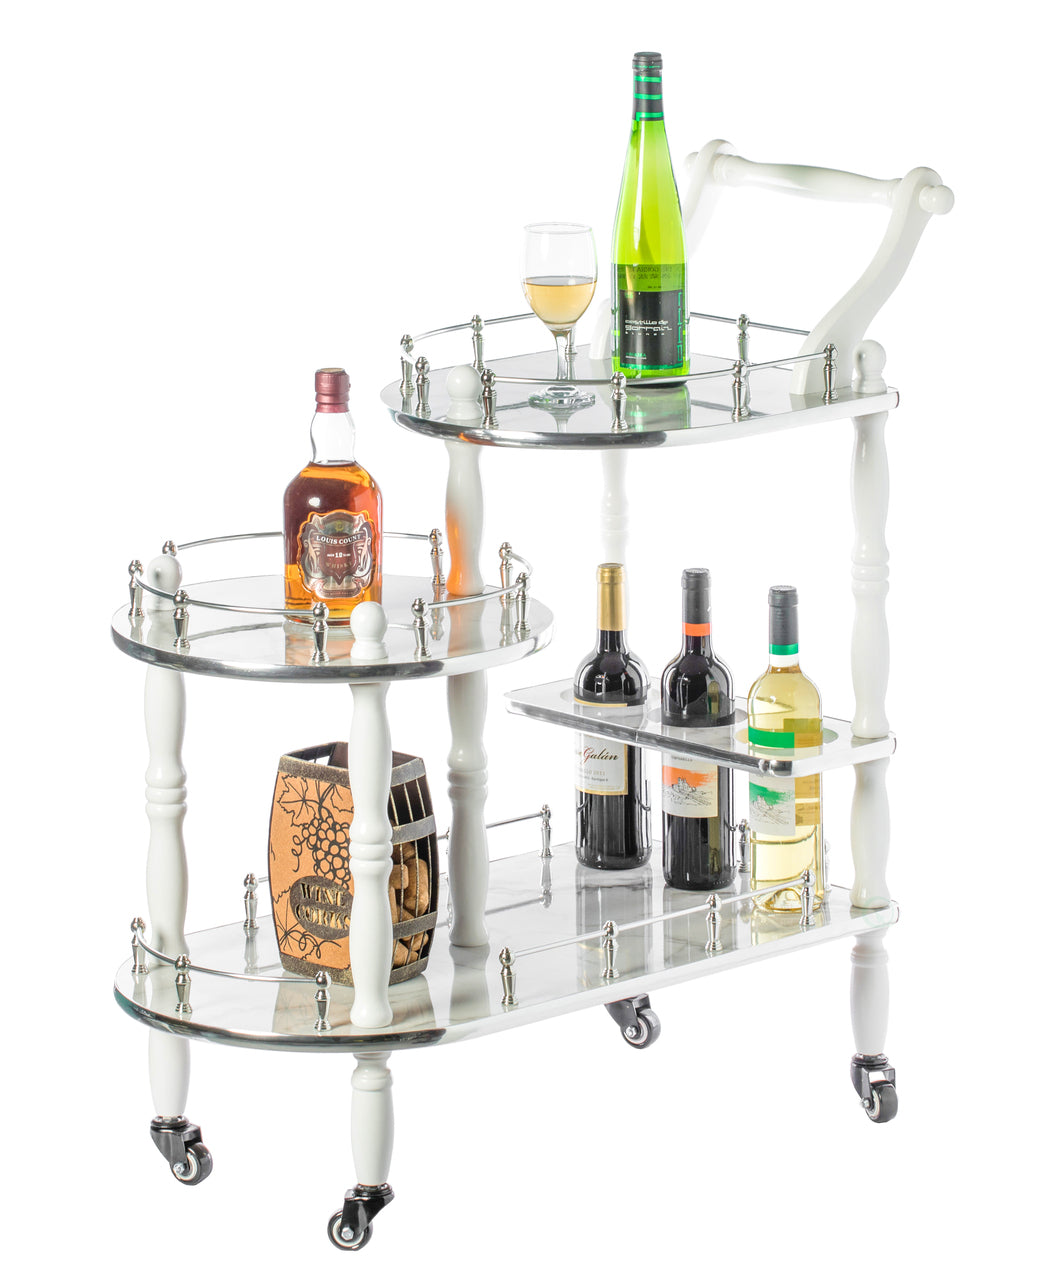 Wood Serving Bar Cart Tea Trolley with 3 Tier Shelves and Rolling Wheels QI003775-Wine Bottle Holders-The Wine Cooler Club